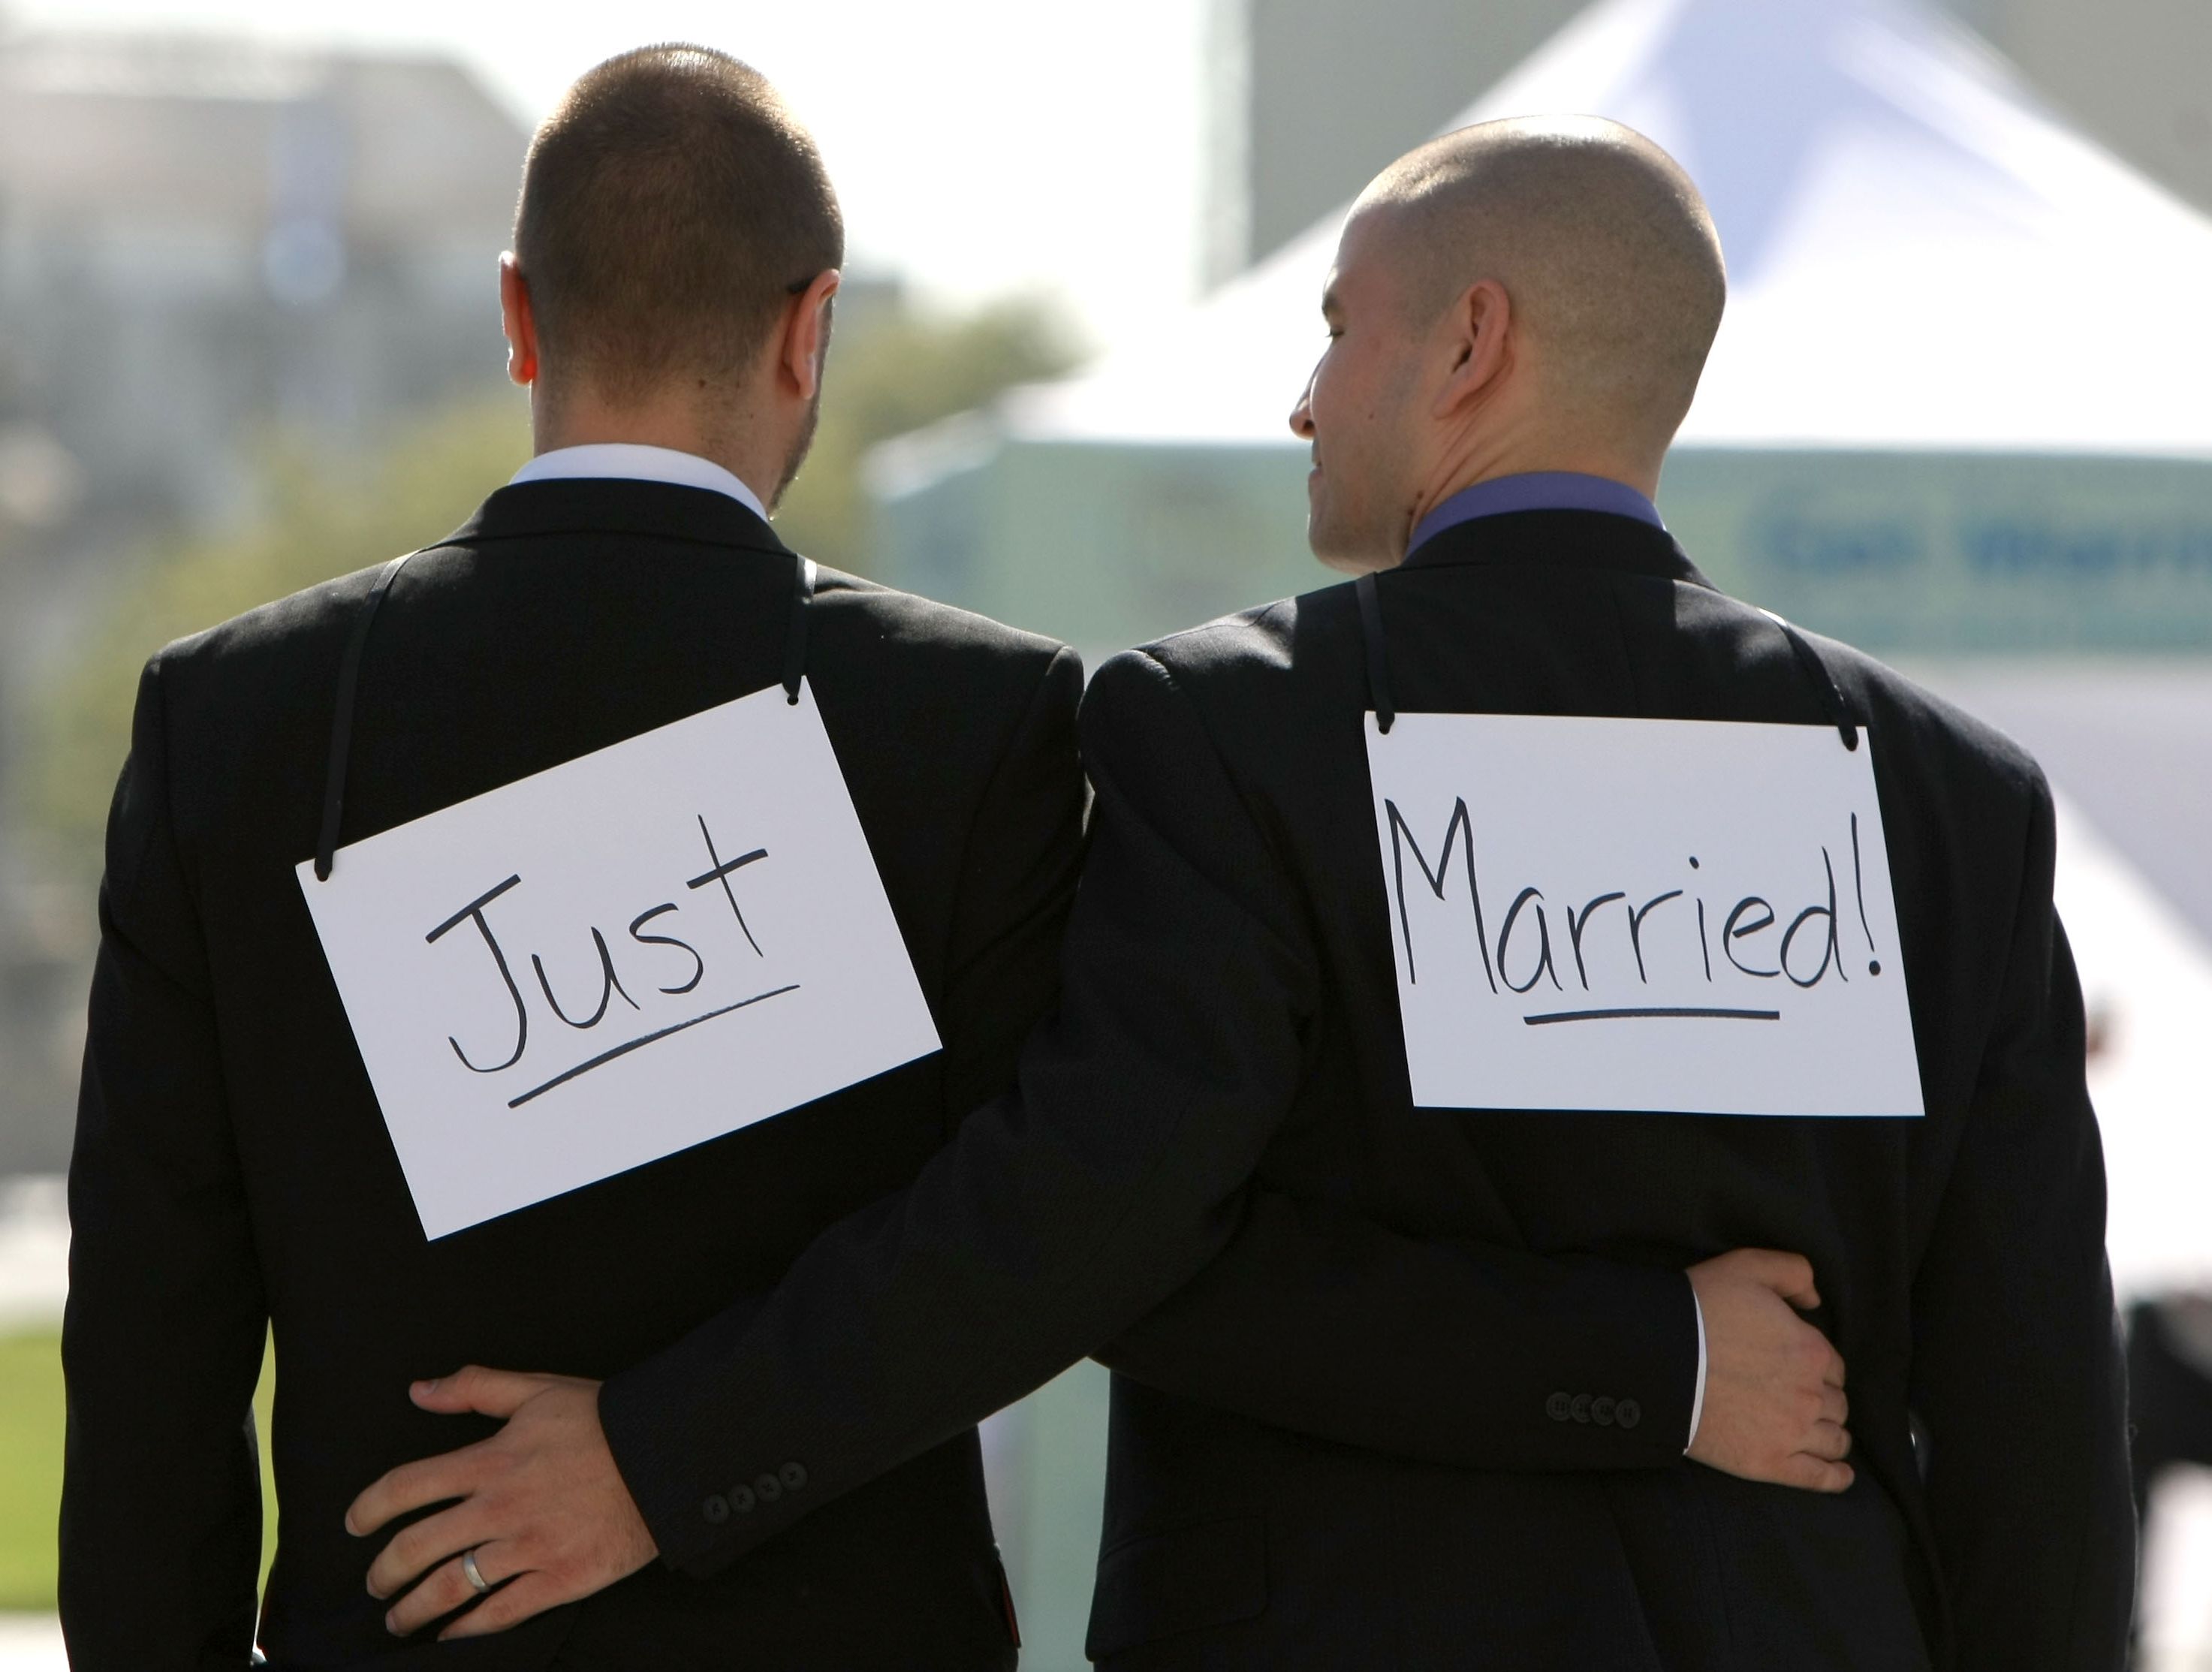 Over 13 000 Worshipers Quit Church Over Gay Marriage